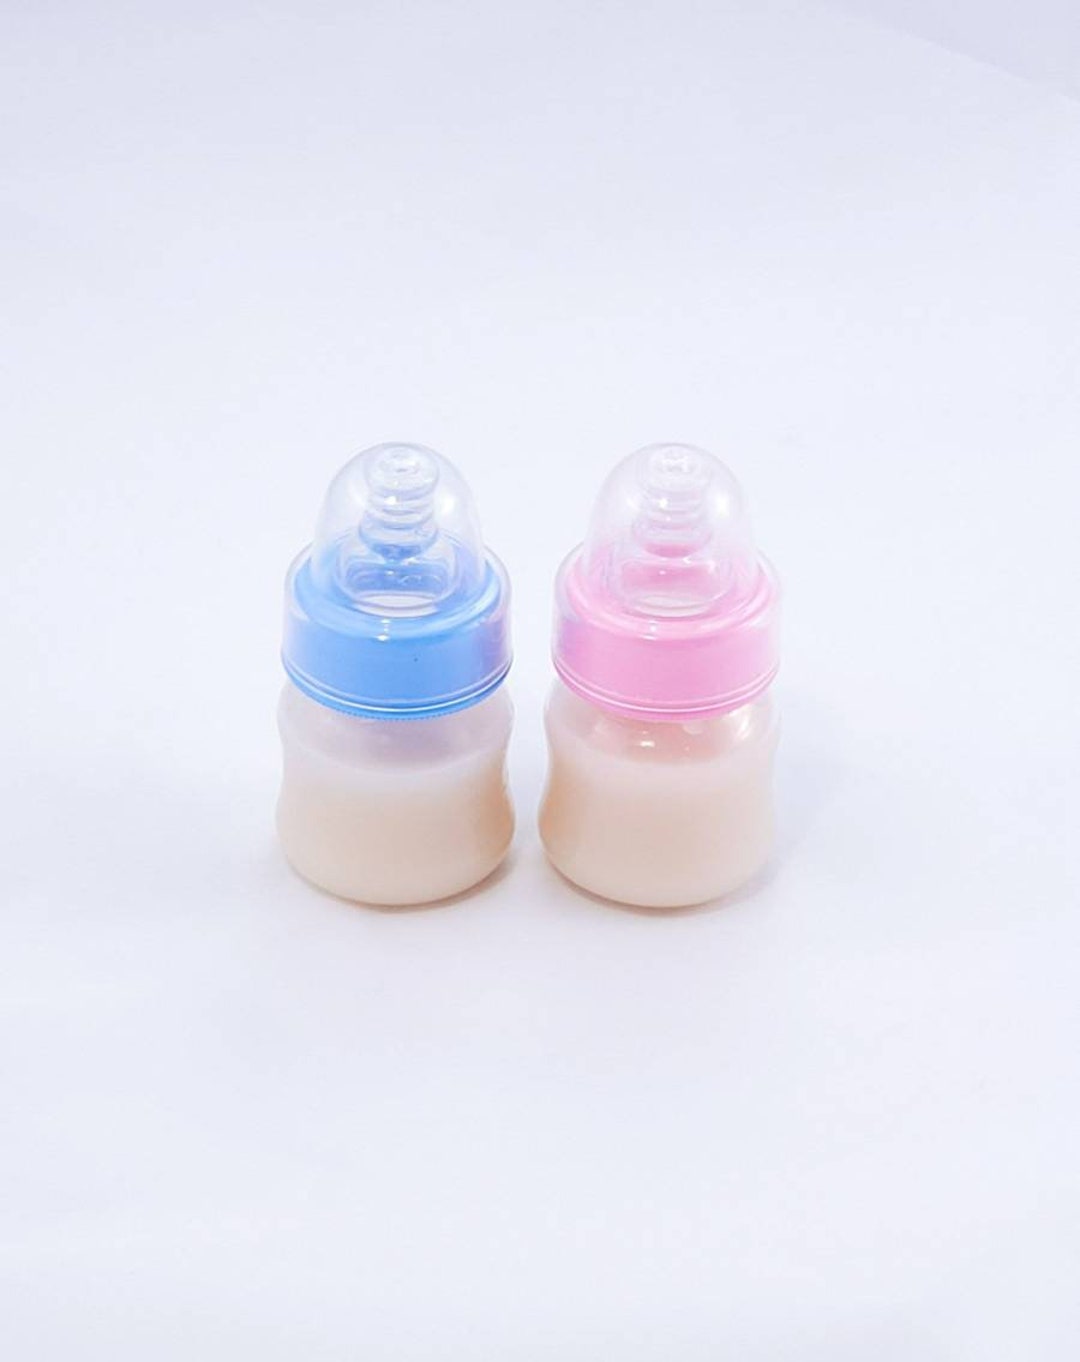  Mommy & Me Baby Doll Bottles with Disappearing Milk